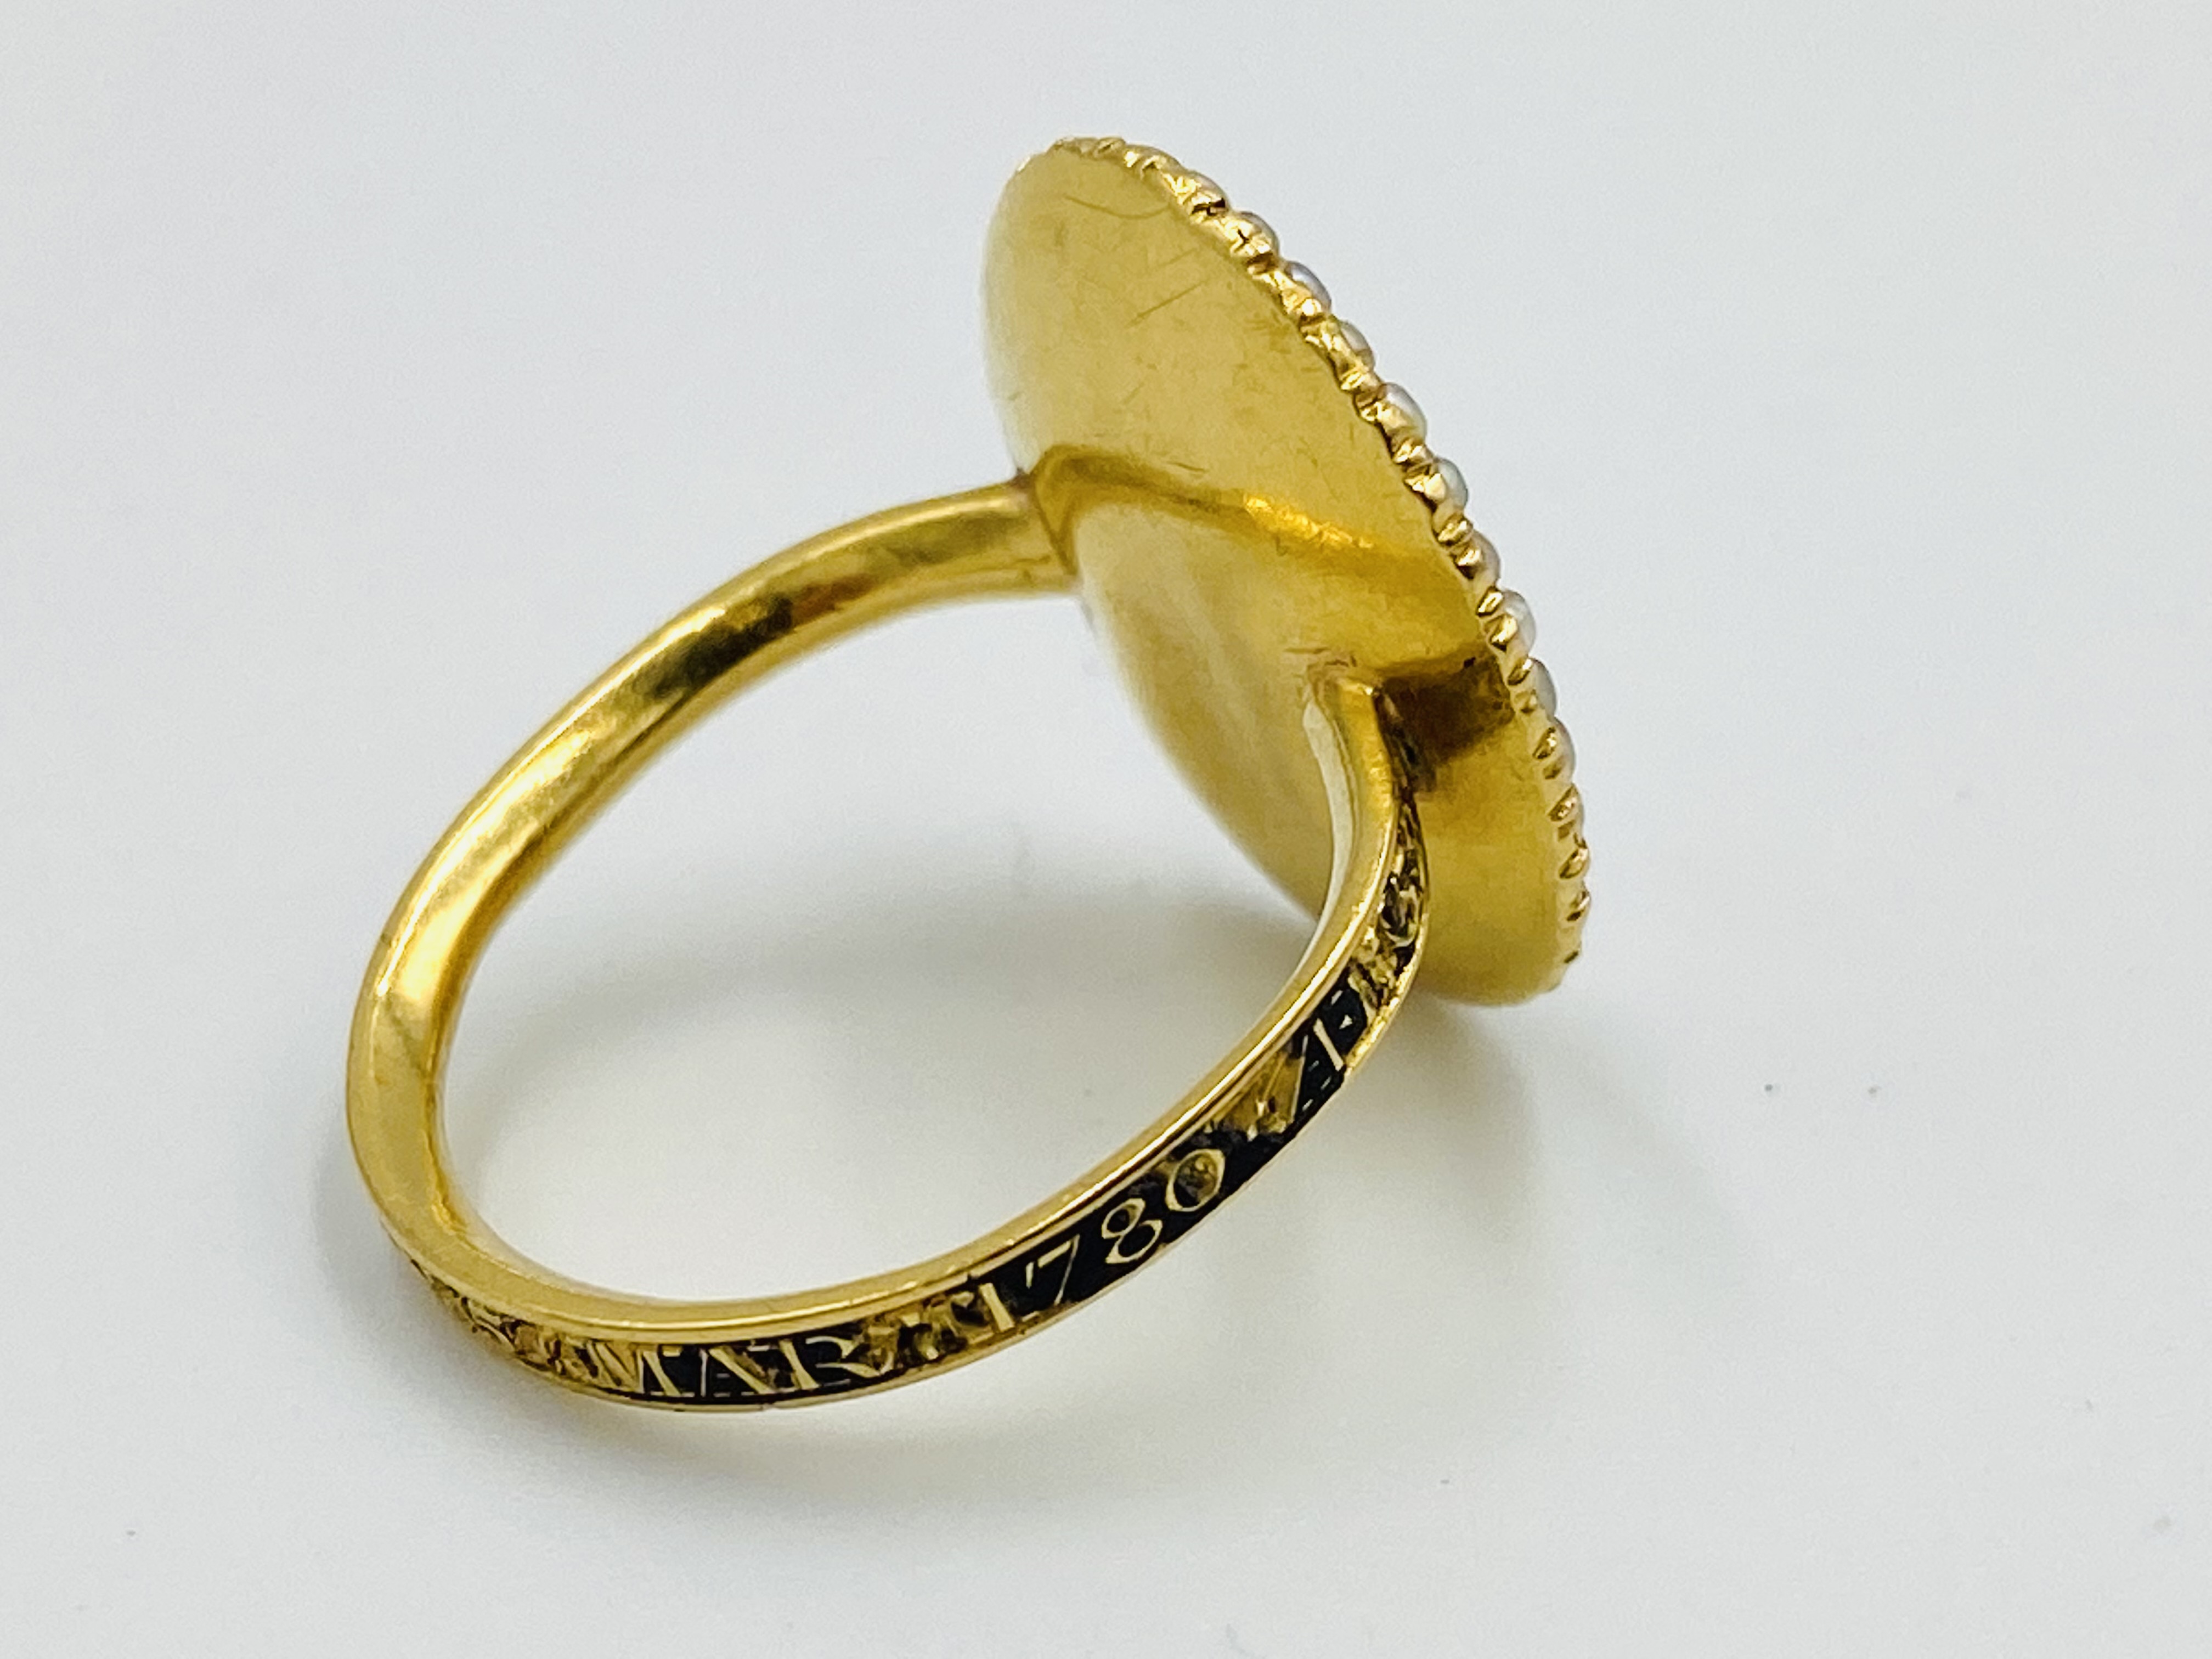 Gold mourning ring dated 1852 - Image 4 of 5